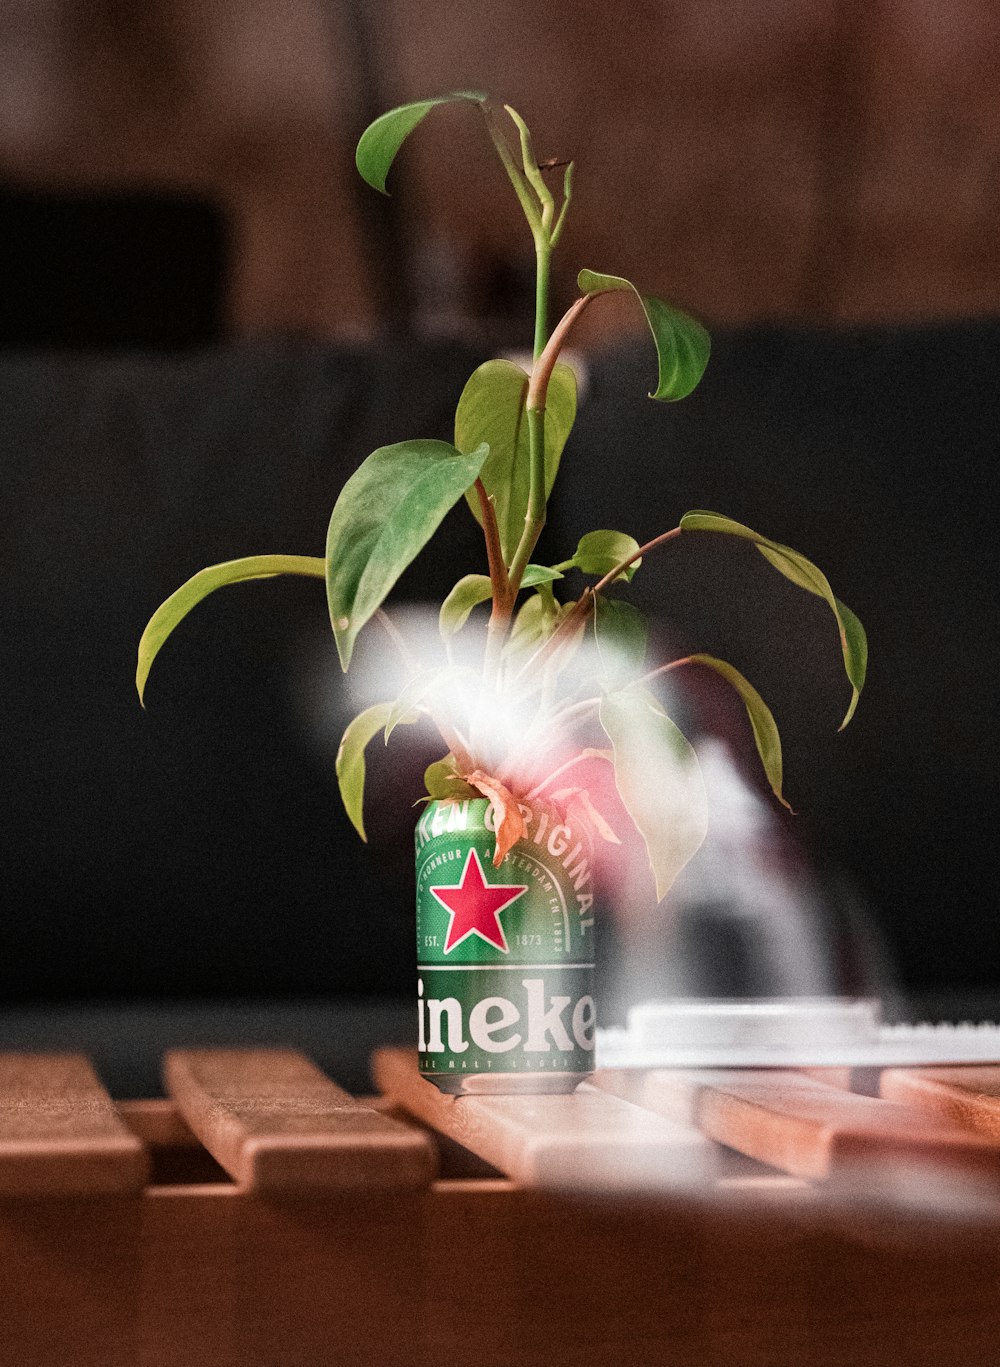 a can of heineken beer with a plant in it